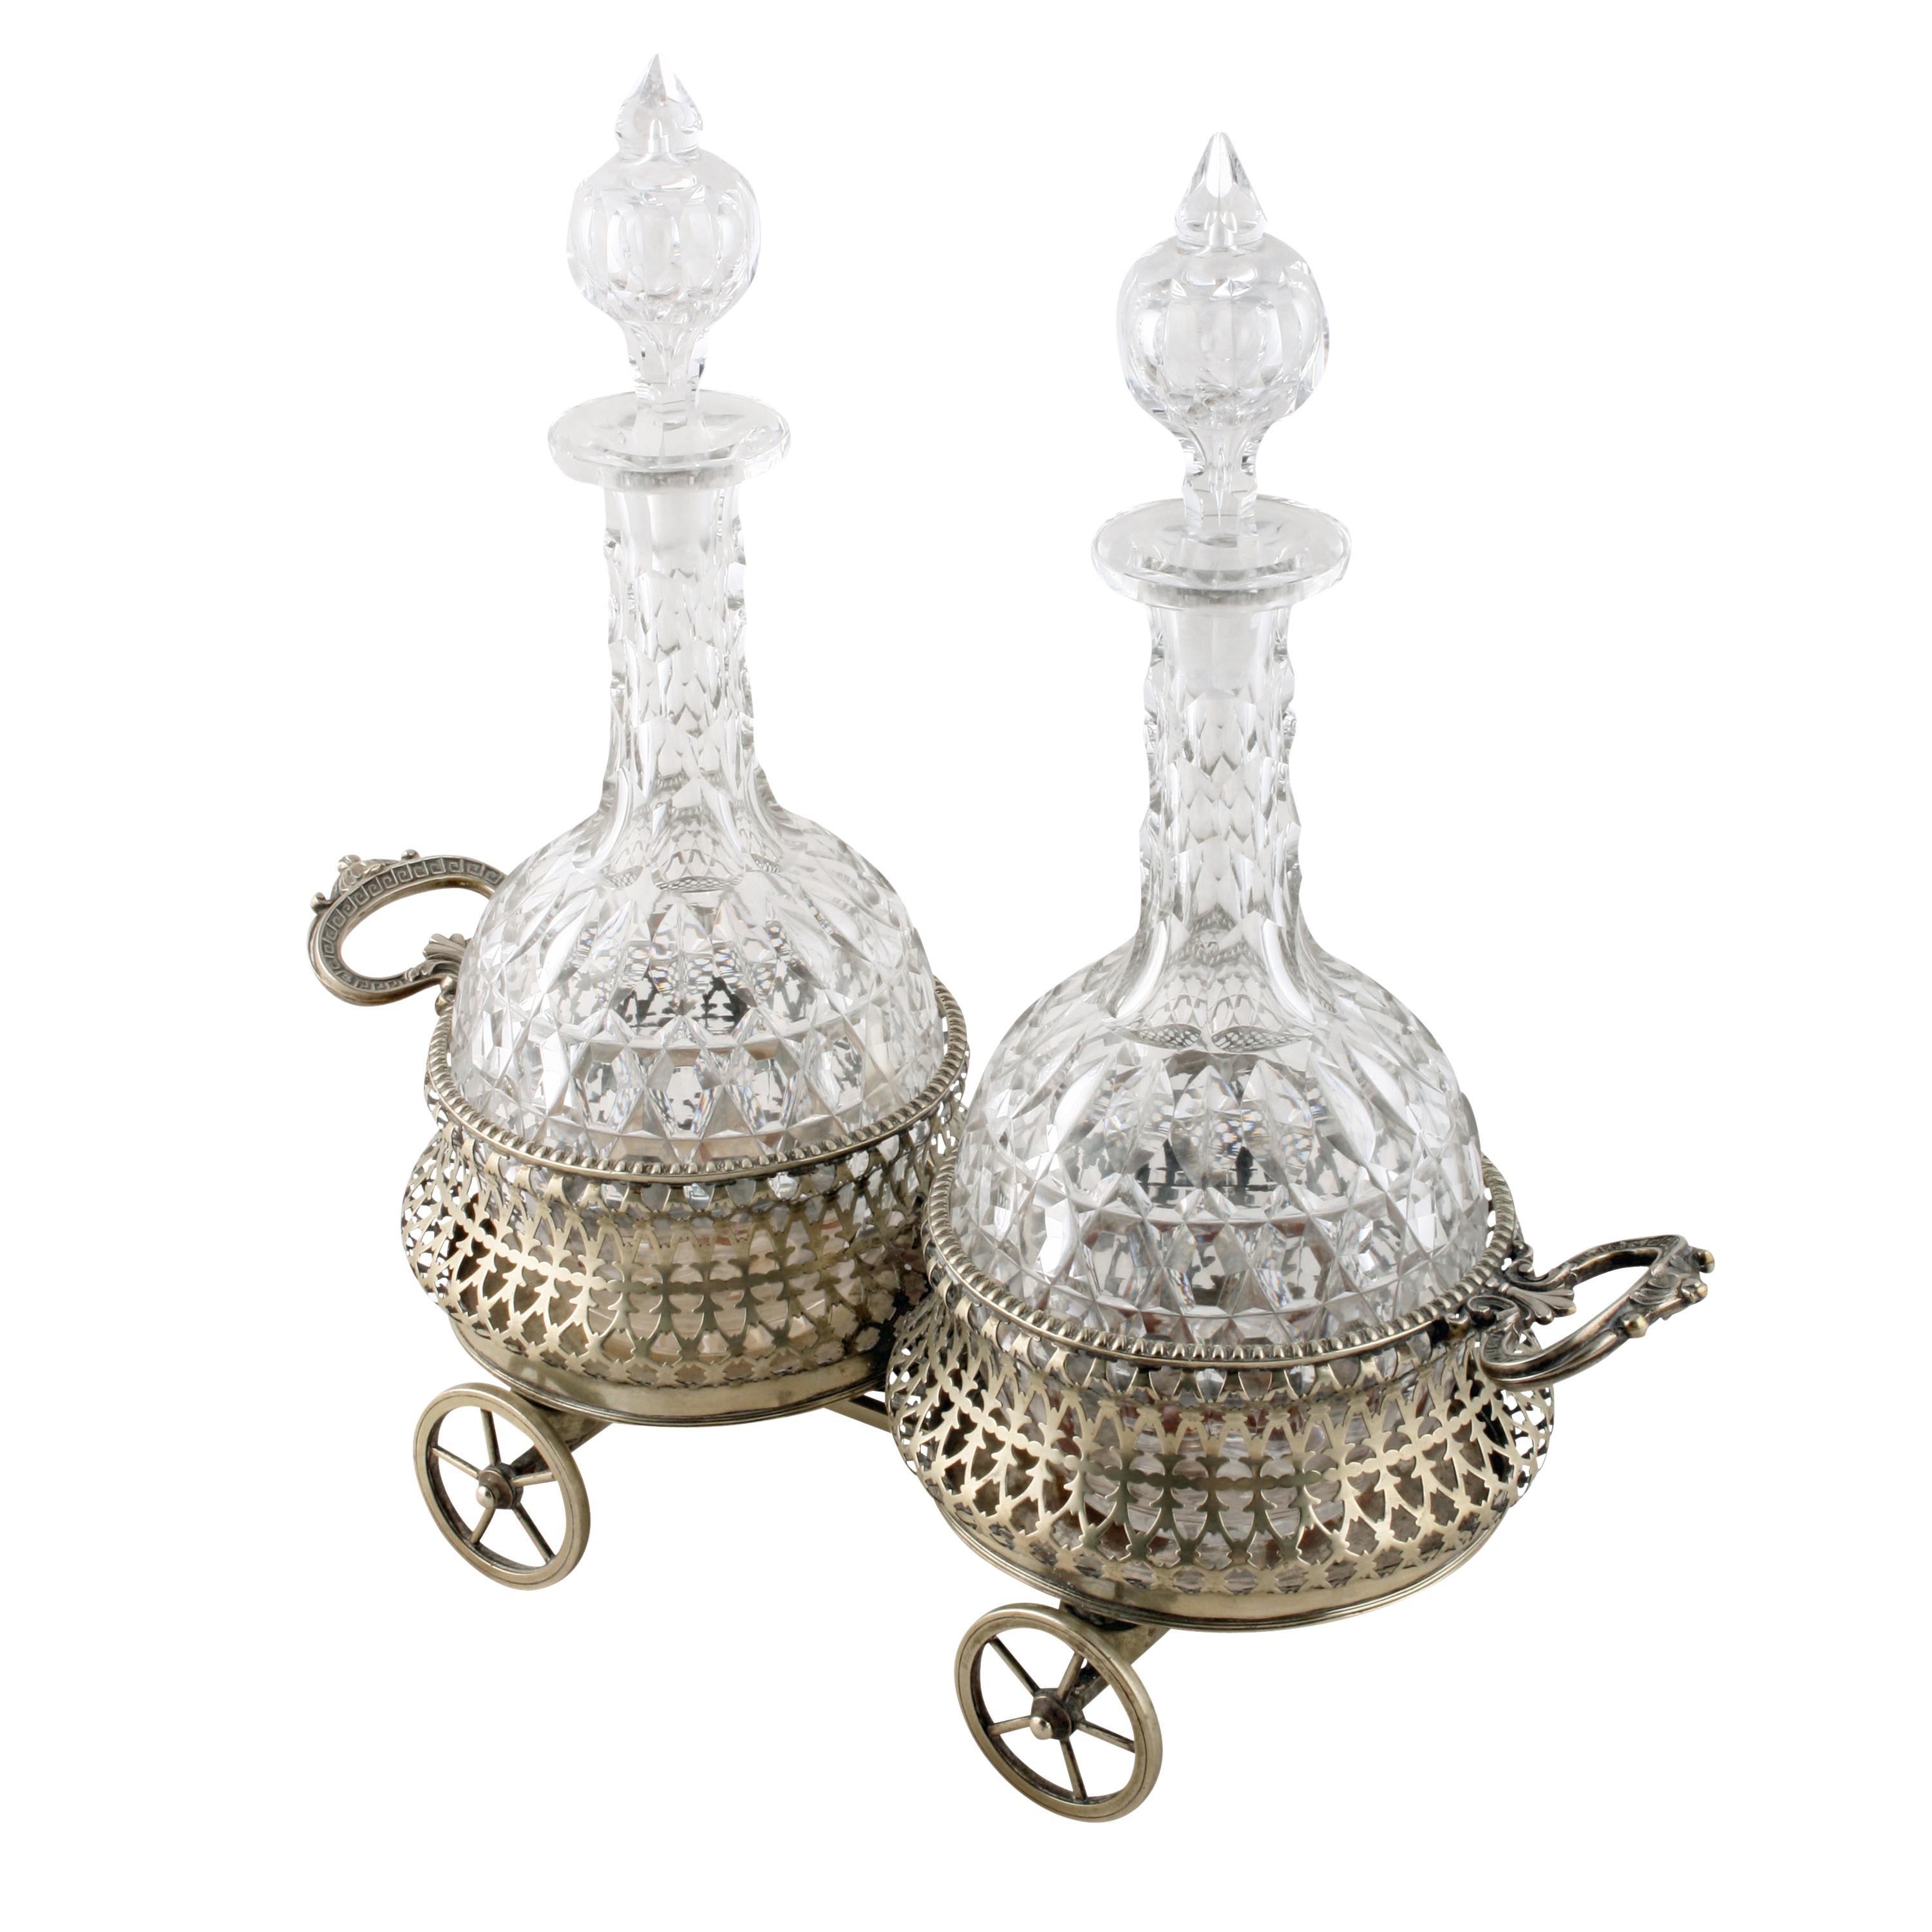 A Victorian silver plated wine coaster wagon and decanters.

The wagon has a pair of open work coasters that are mounted on four open spoke wagon wheels.

The wagon has a carrying handle at each end that is decorated with a Greek key